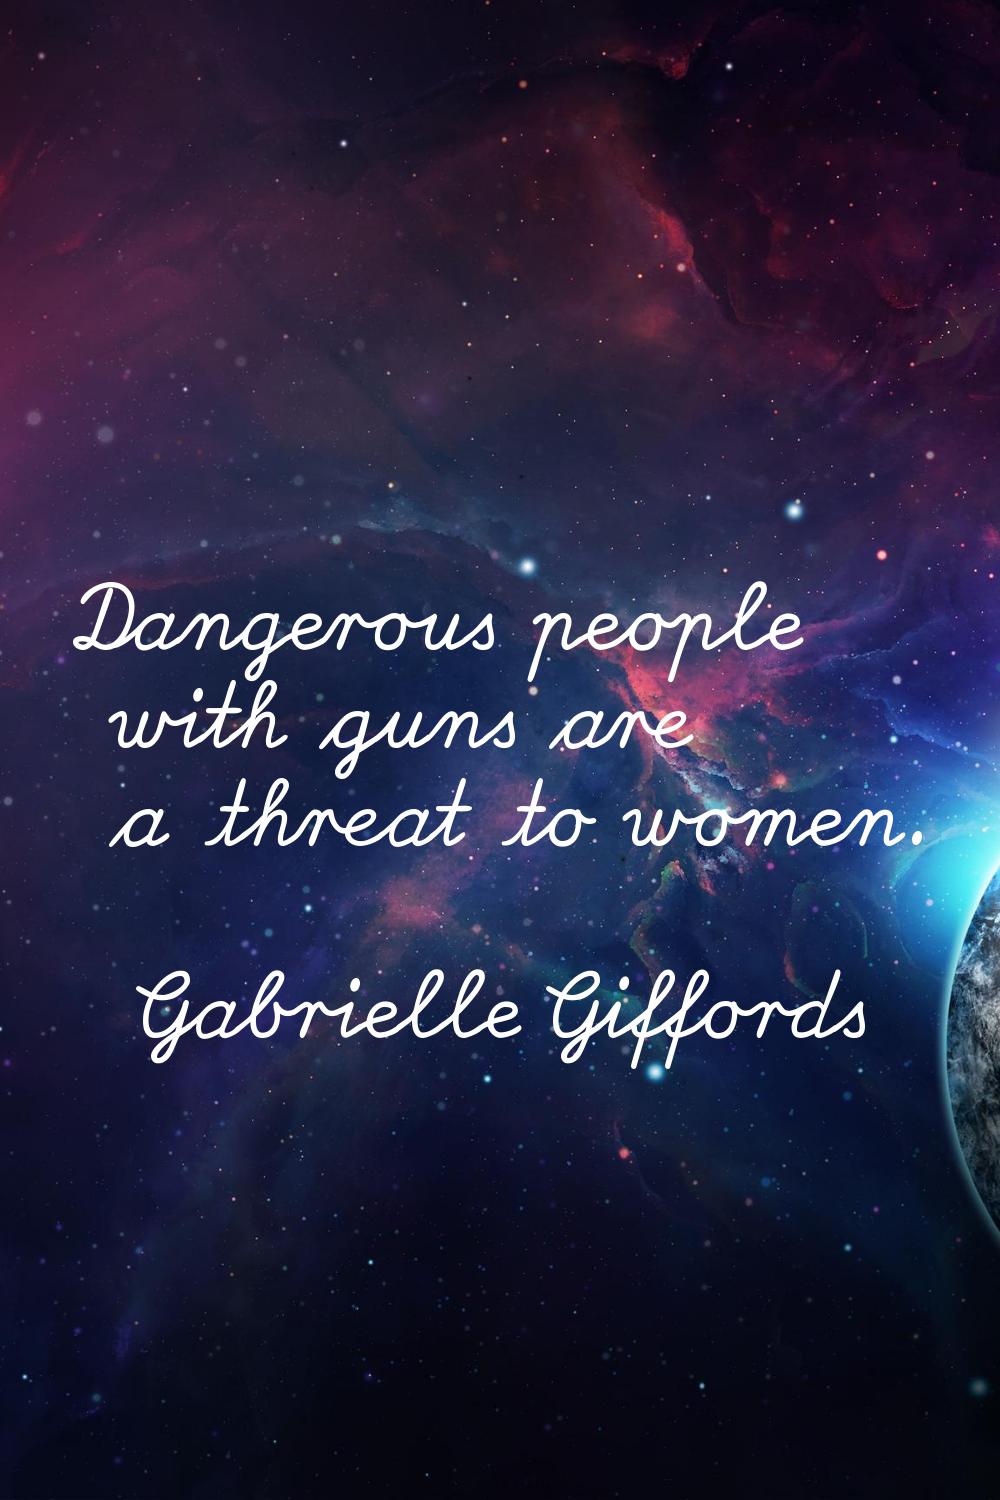 Dangerous people with guns are a threat to women.